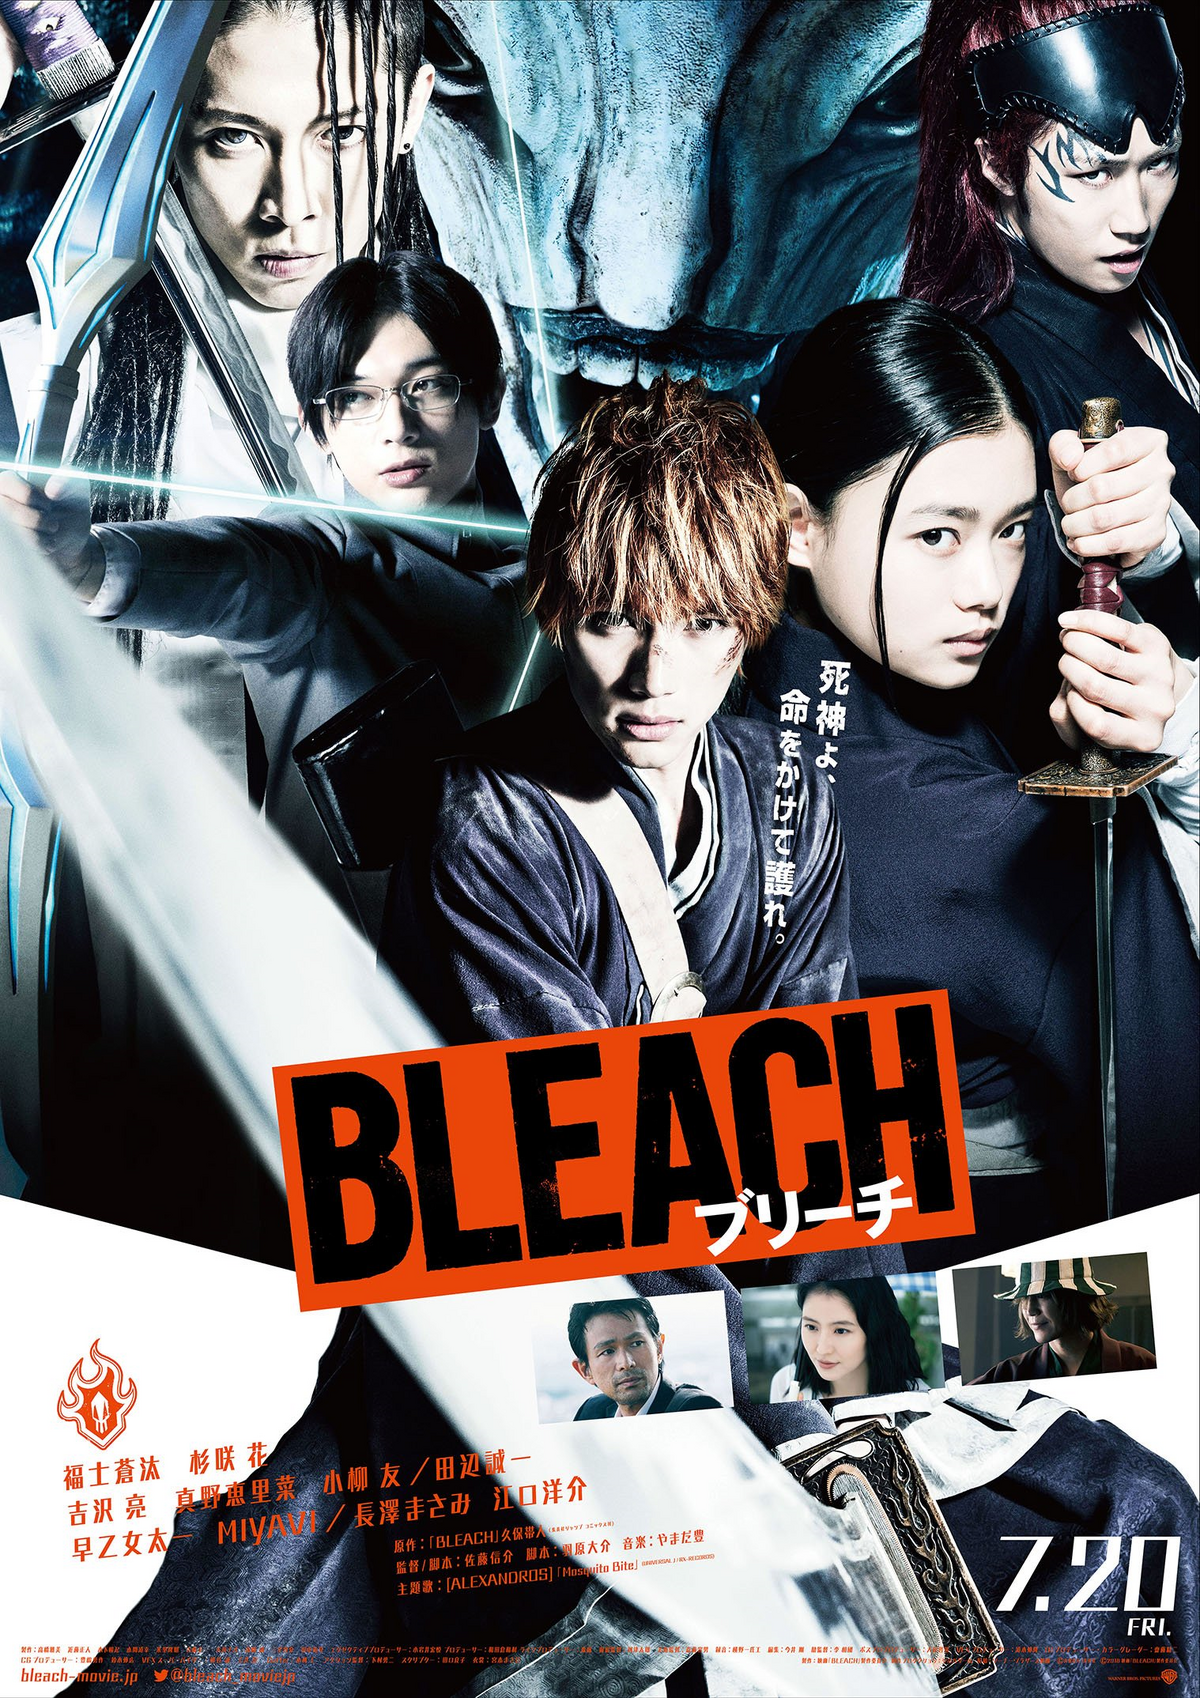 Insane Rumour Suggests A Bleach Game Could be in the Works